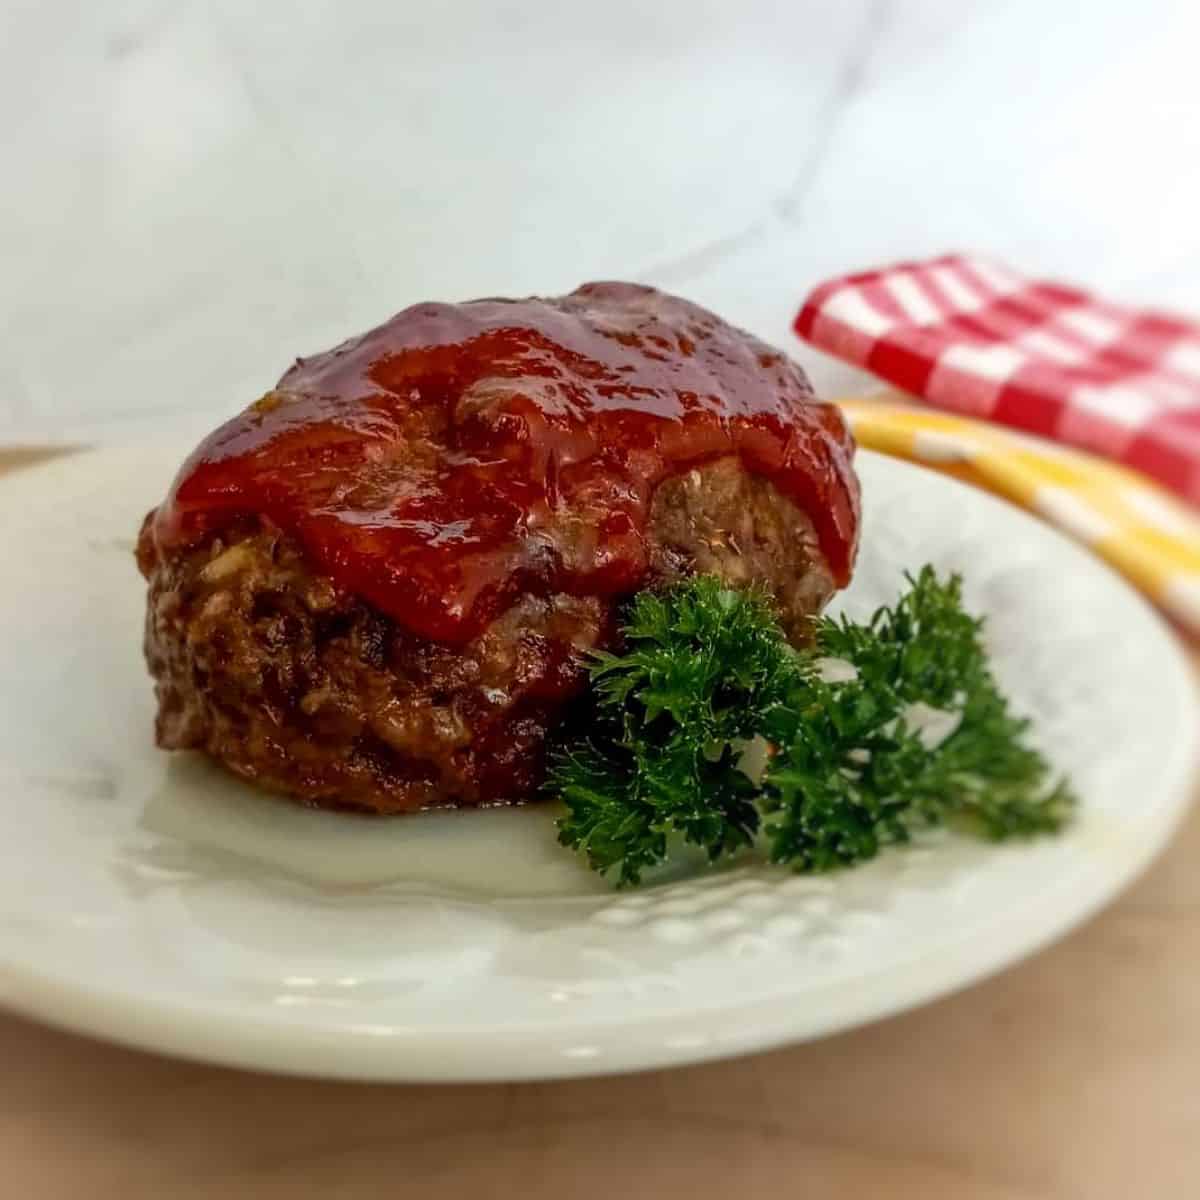 an Amish mini cheesy meatloaf on a plate with parsley and kitchen towels for decor